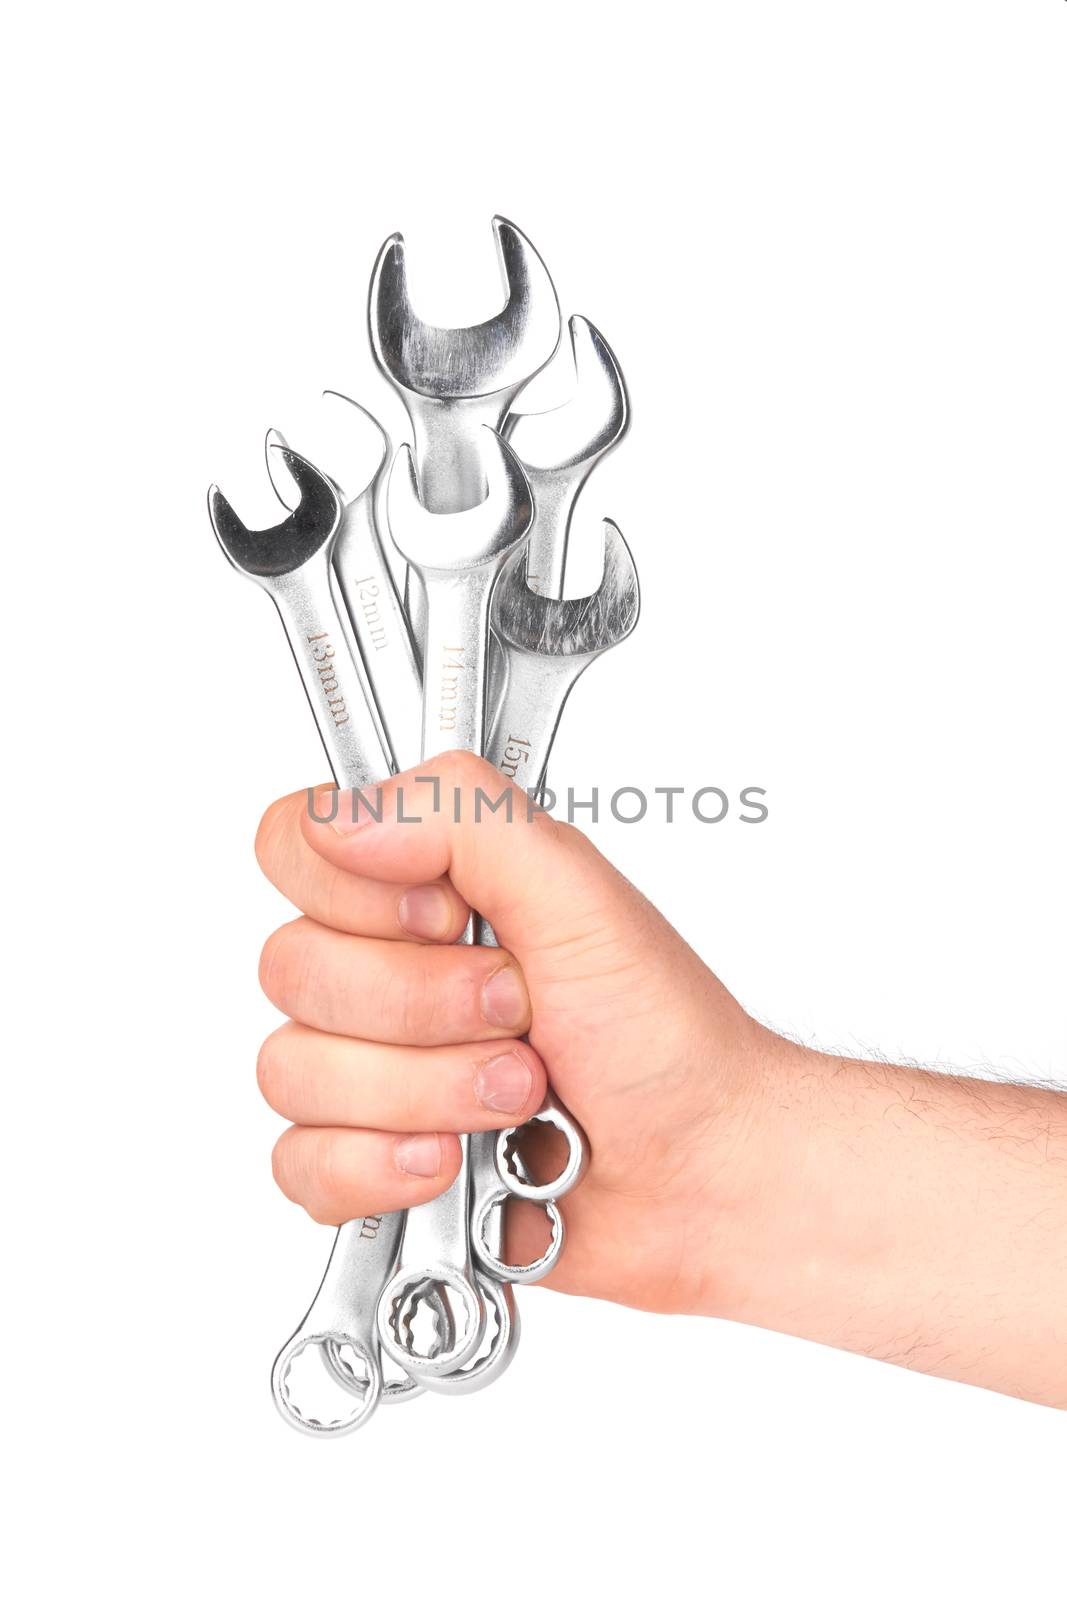 Hand with tools completely isolated on white background 